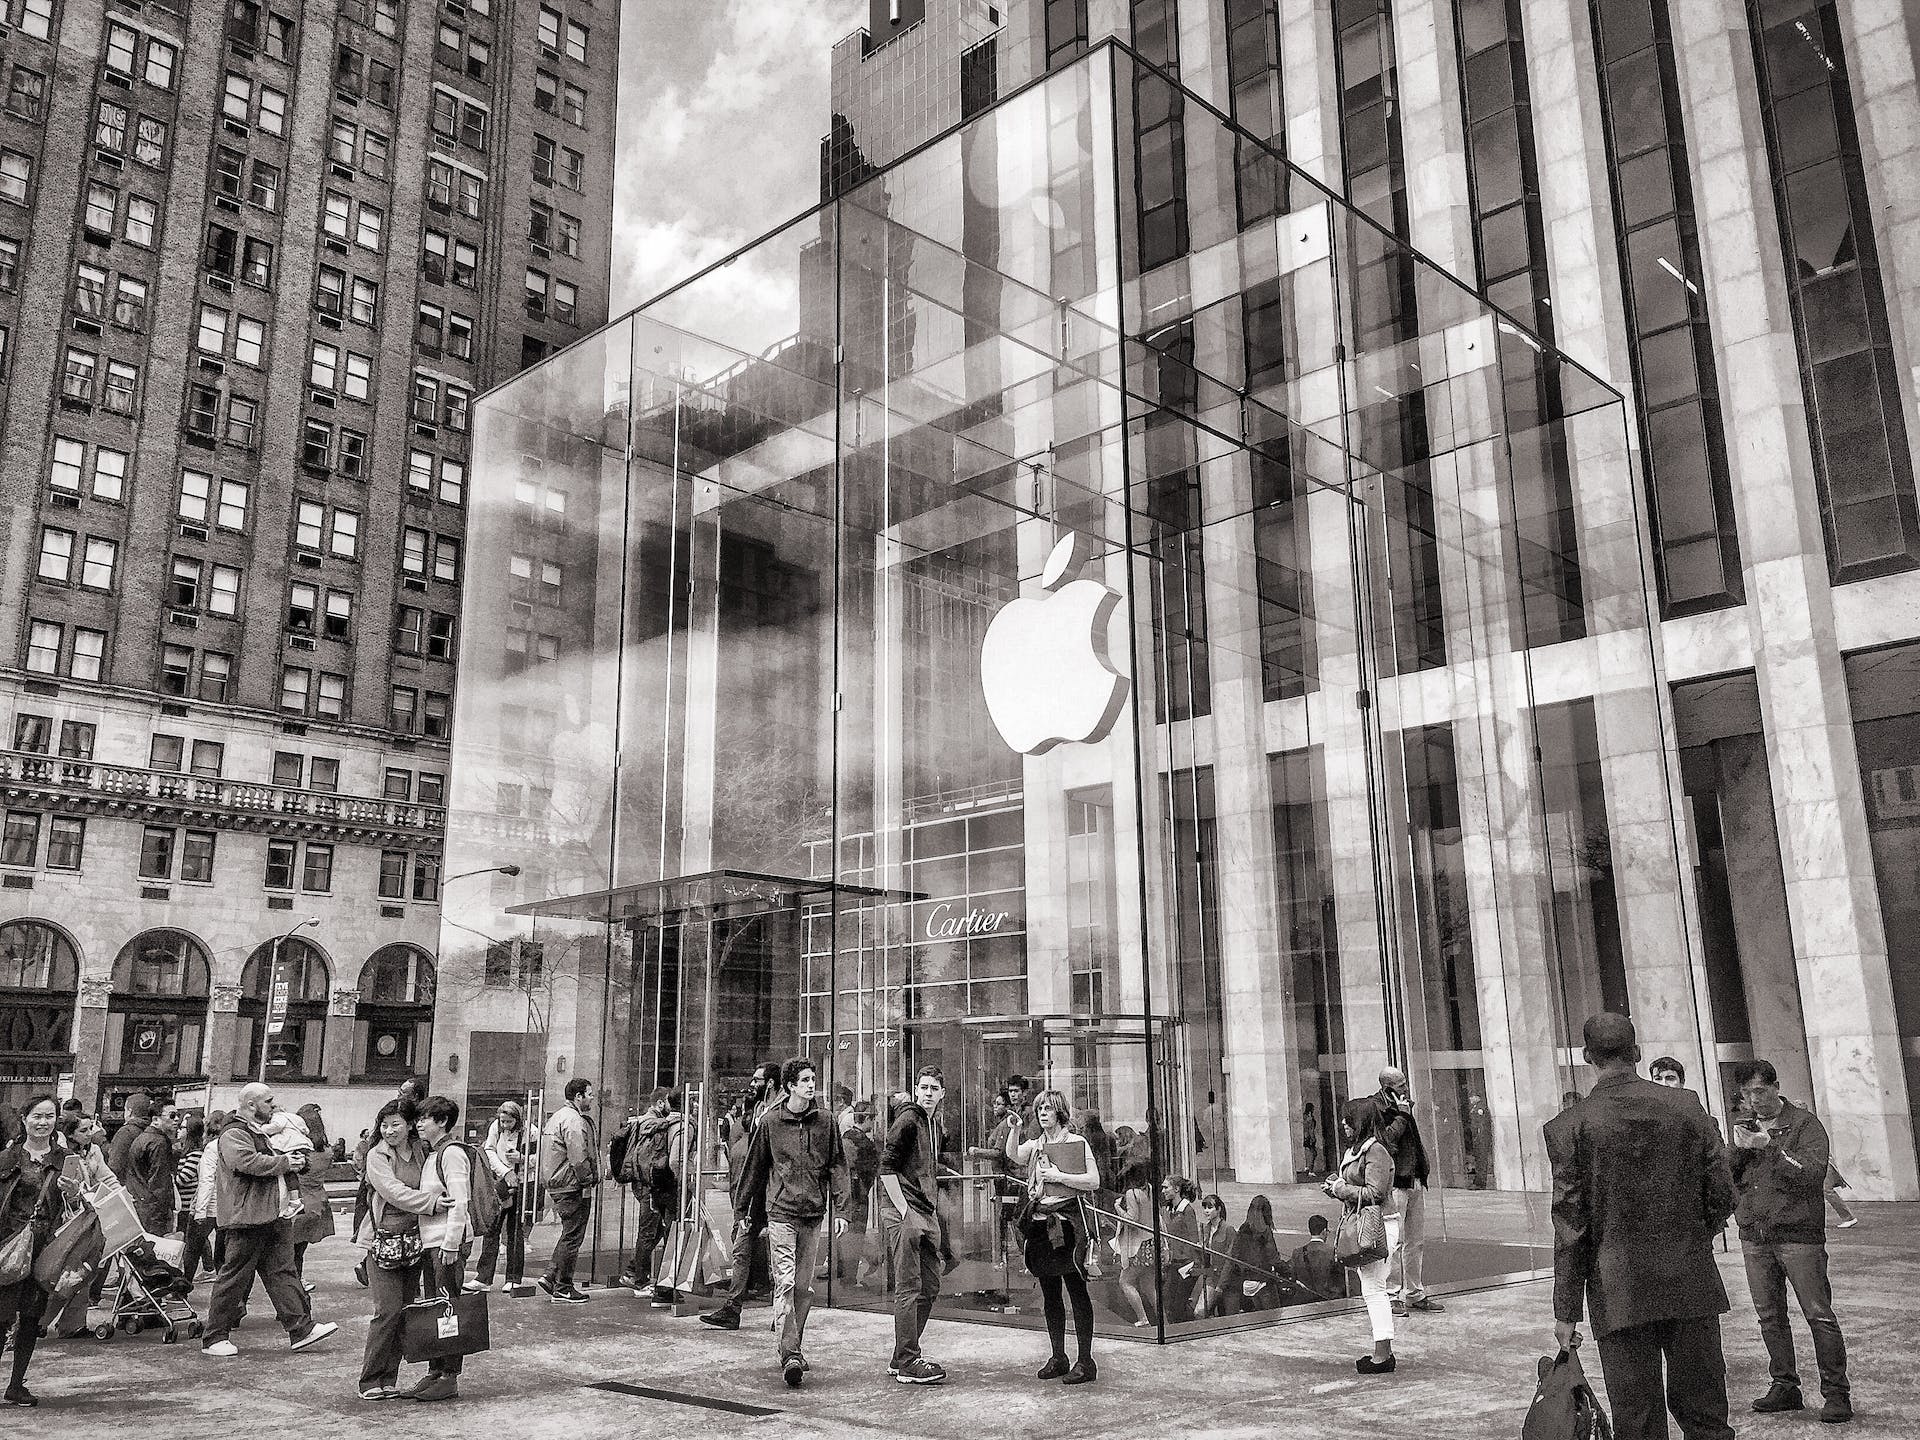 Customers gather around the bustling entrance of an iconic glass-walled Apple Store, symbolising the iPhone luxury trend in modern technology retail